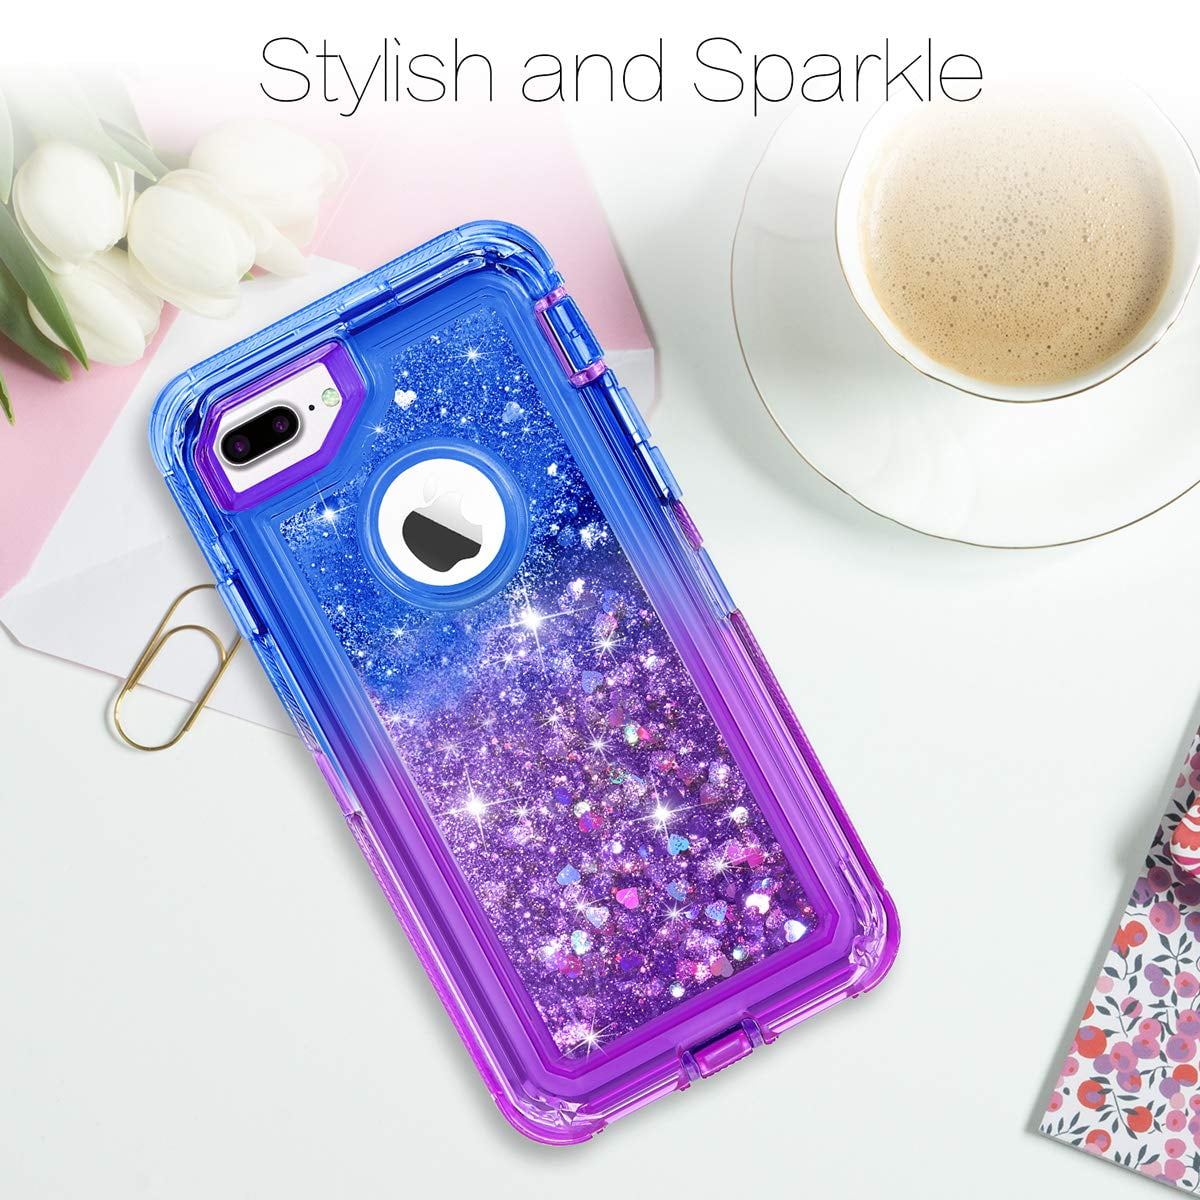 Case Modes Plus iPhone iPhone 6/6S Plus Plus / for 7 Silicone 8 Sparkling Wireless iPhone Apple / Cover -